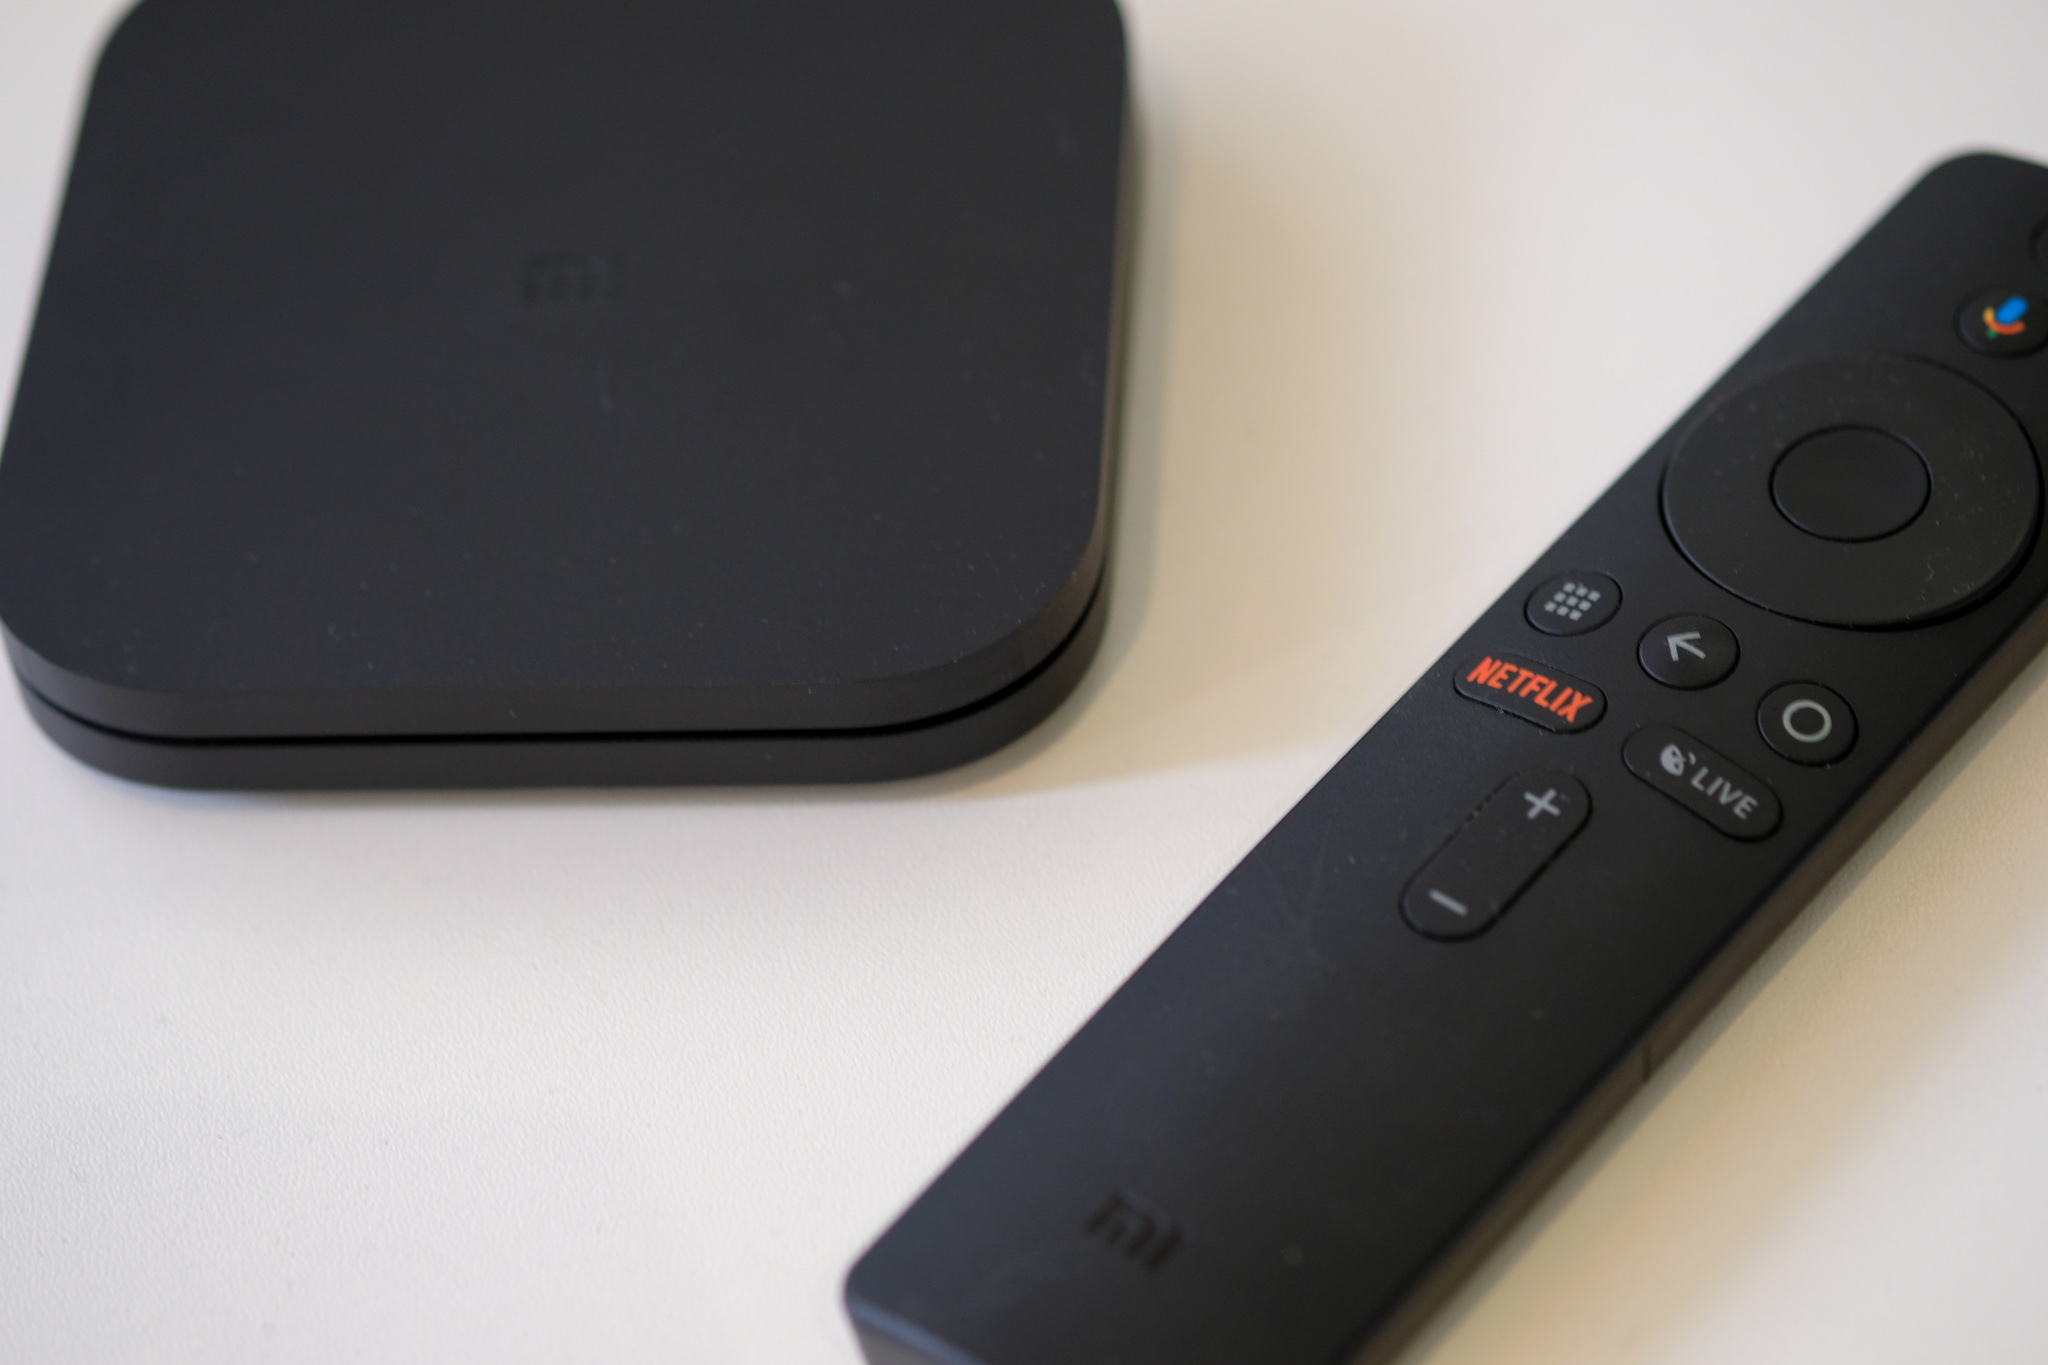 Xiaomi Mi Box S review: a set-top box for affordable 4K streaming